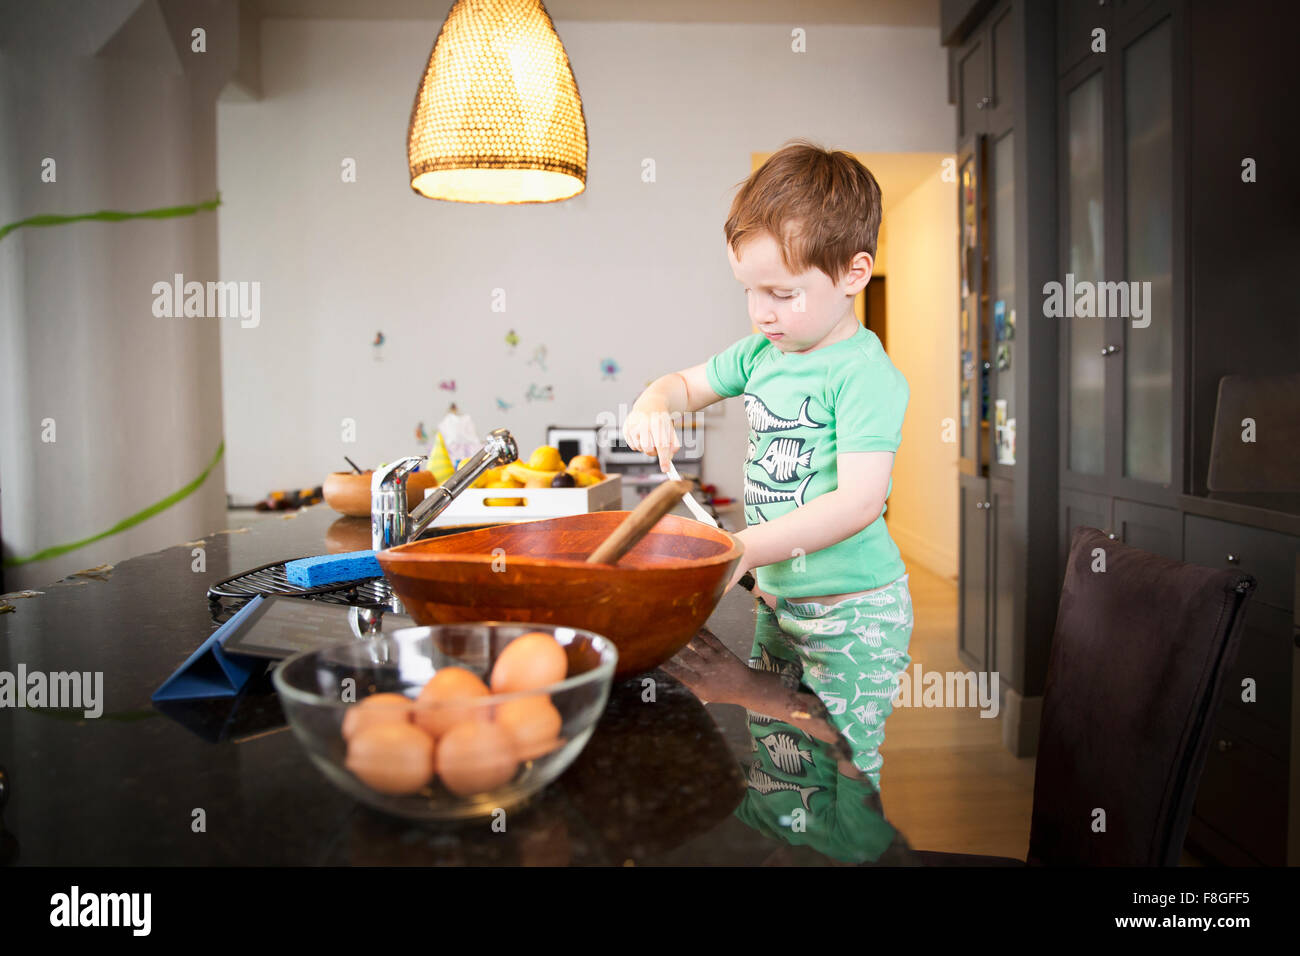 Boy cooking in kitchen Stock Photo